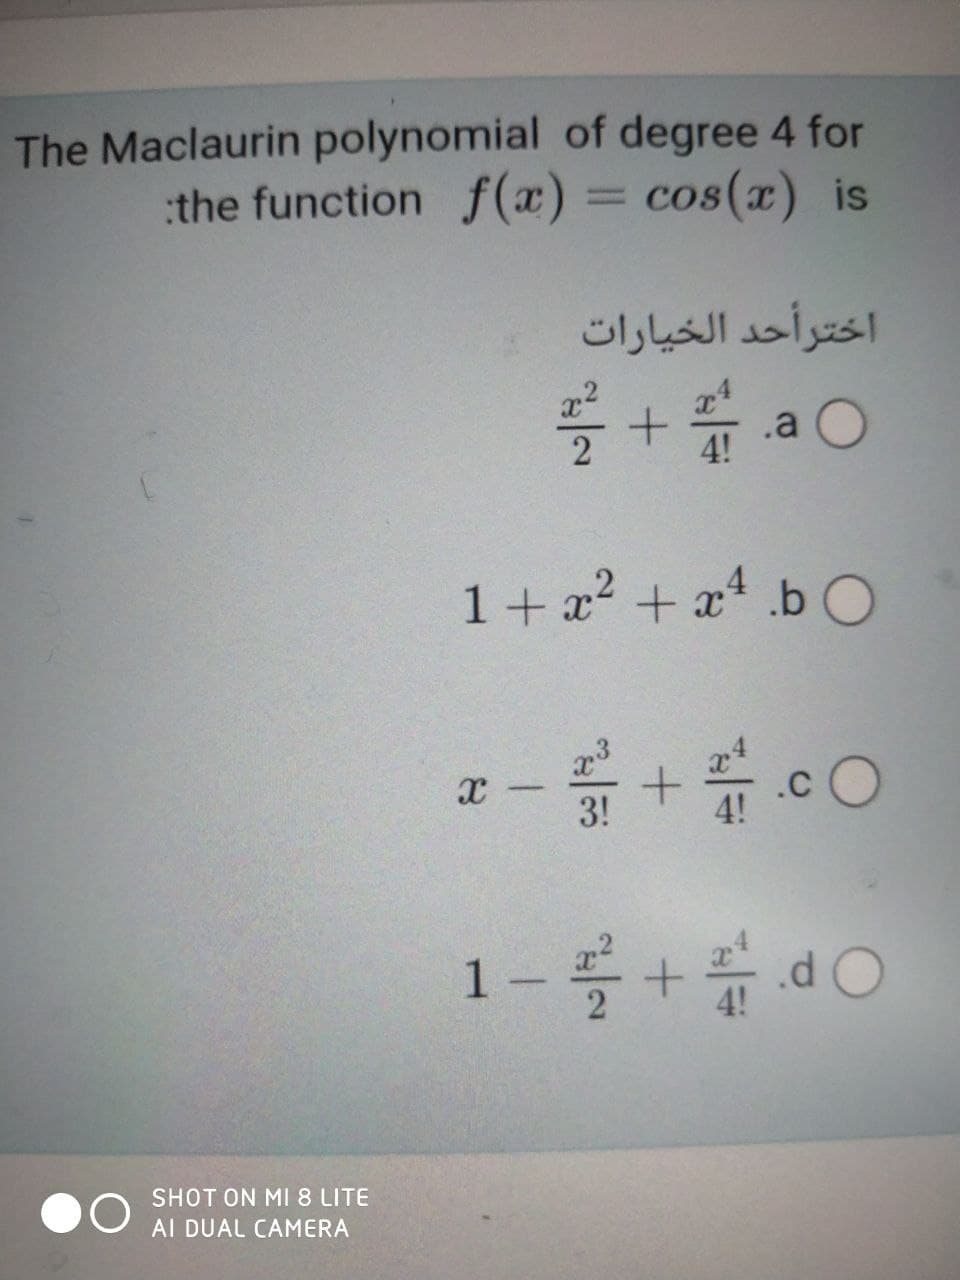 The Maclaurin polynomial of degree 4 for
the function f(x) = cos(x) is
%3D
اخترأحد الخیارات
x2
.a
4!
1+ a + x* _b O
3!
.C
4!
|-
SHOT ON MI8 LITE
AI DUAL CAMERA
